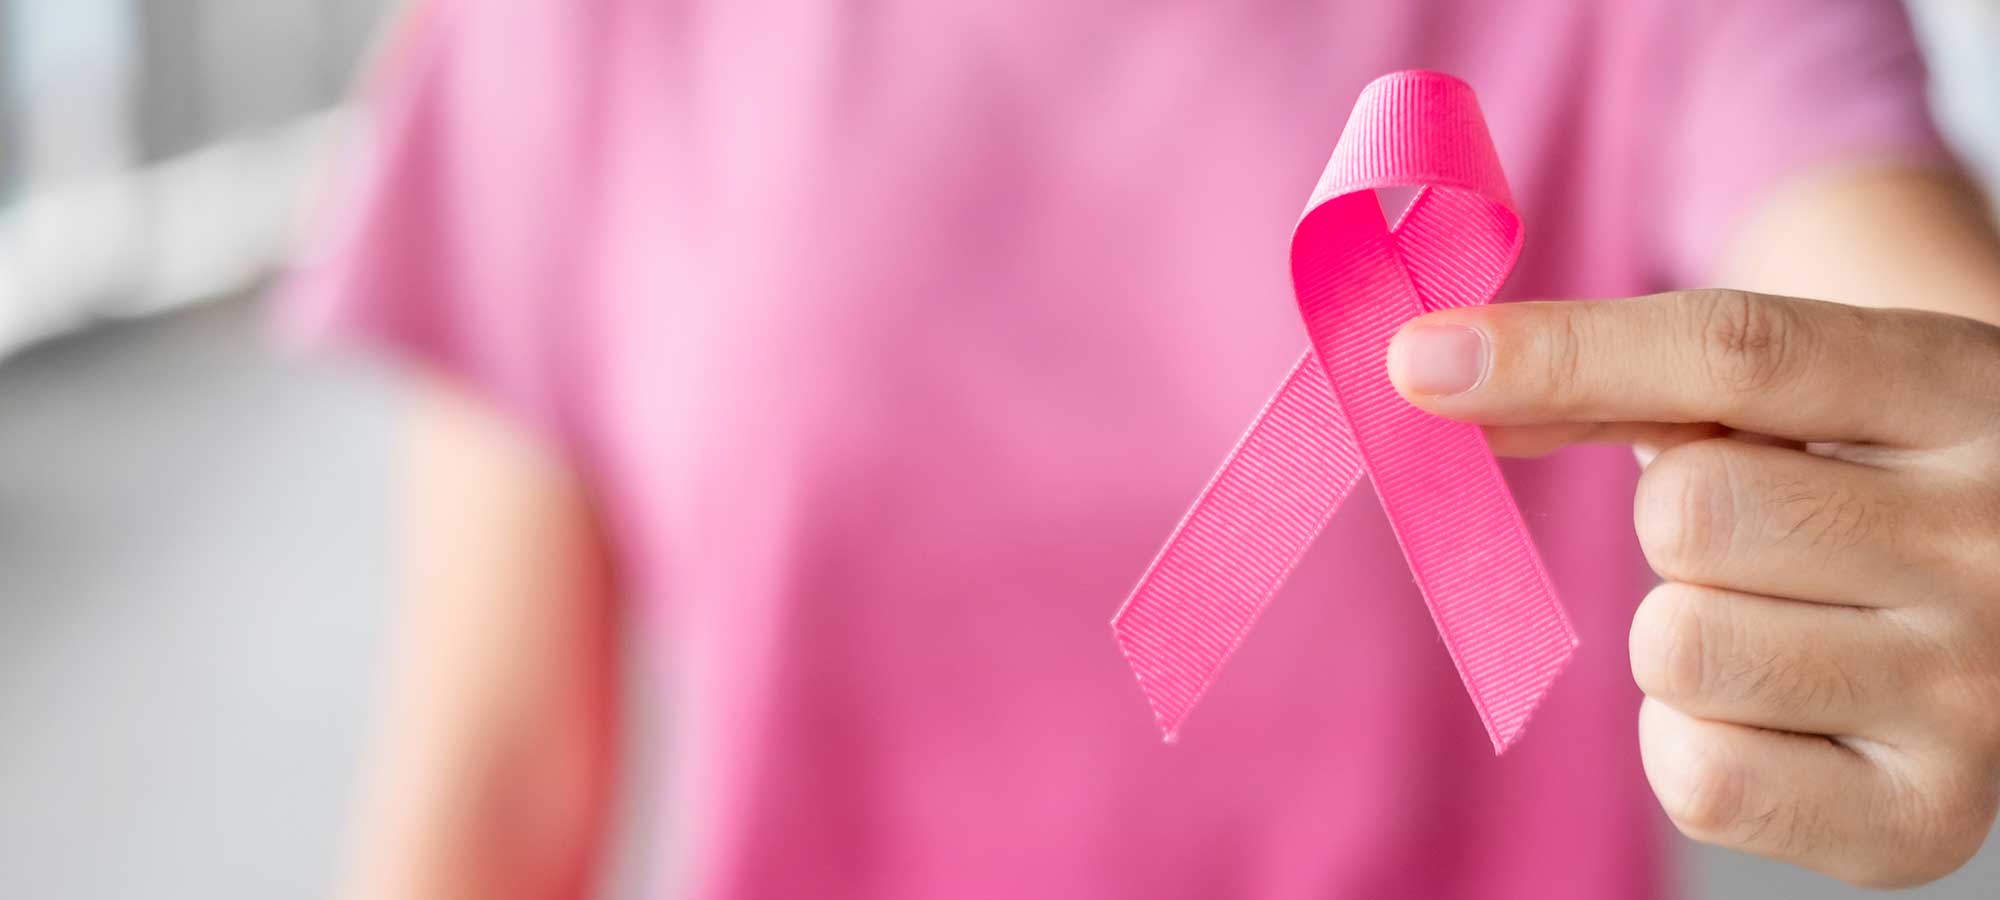 cannabis and breast cancer